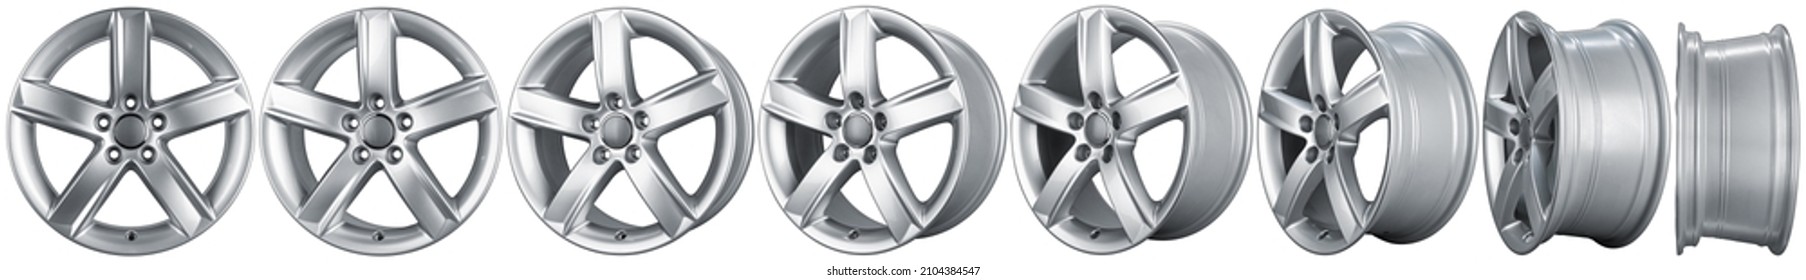 set collection of modern shiny silver metallic alloy aluminum car rim isolated on white background. automotive part indurstry transportation concept